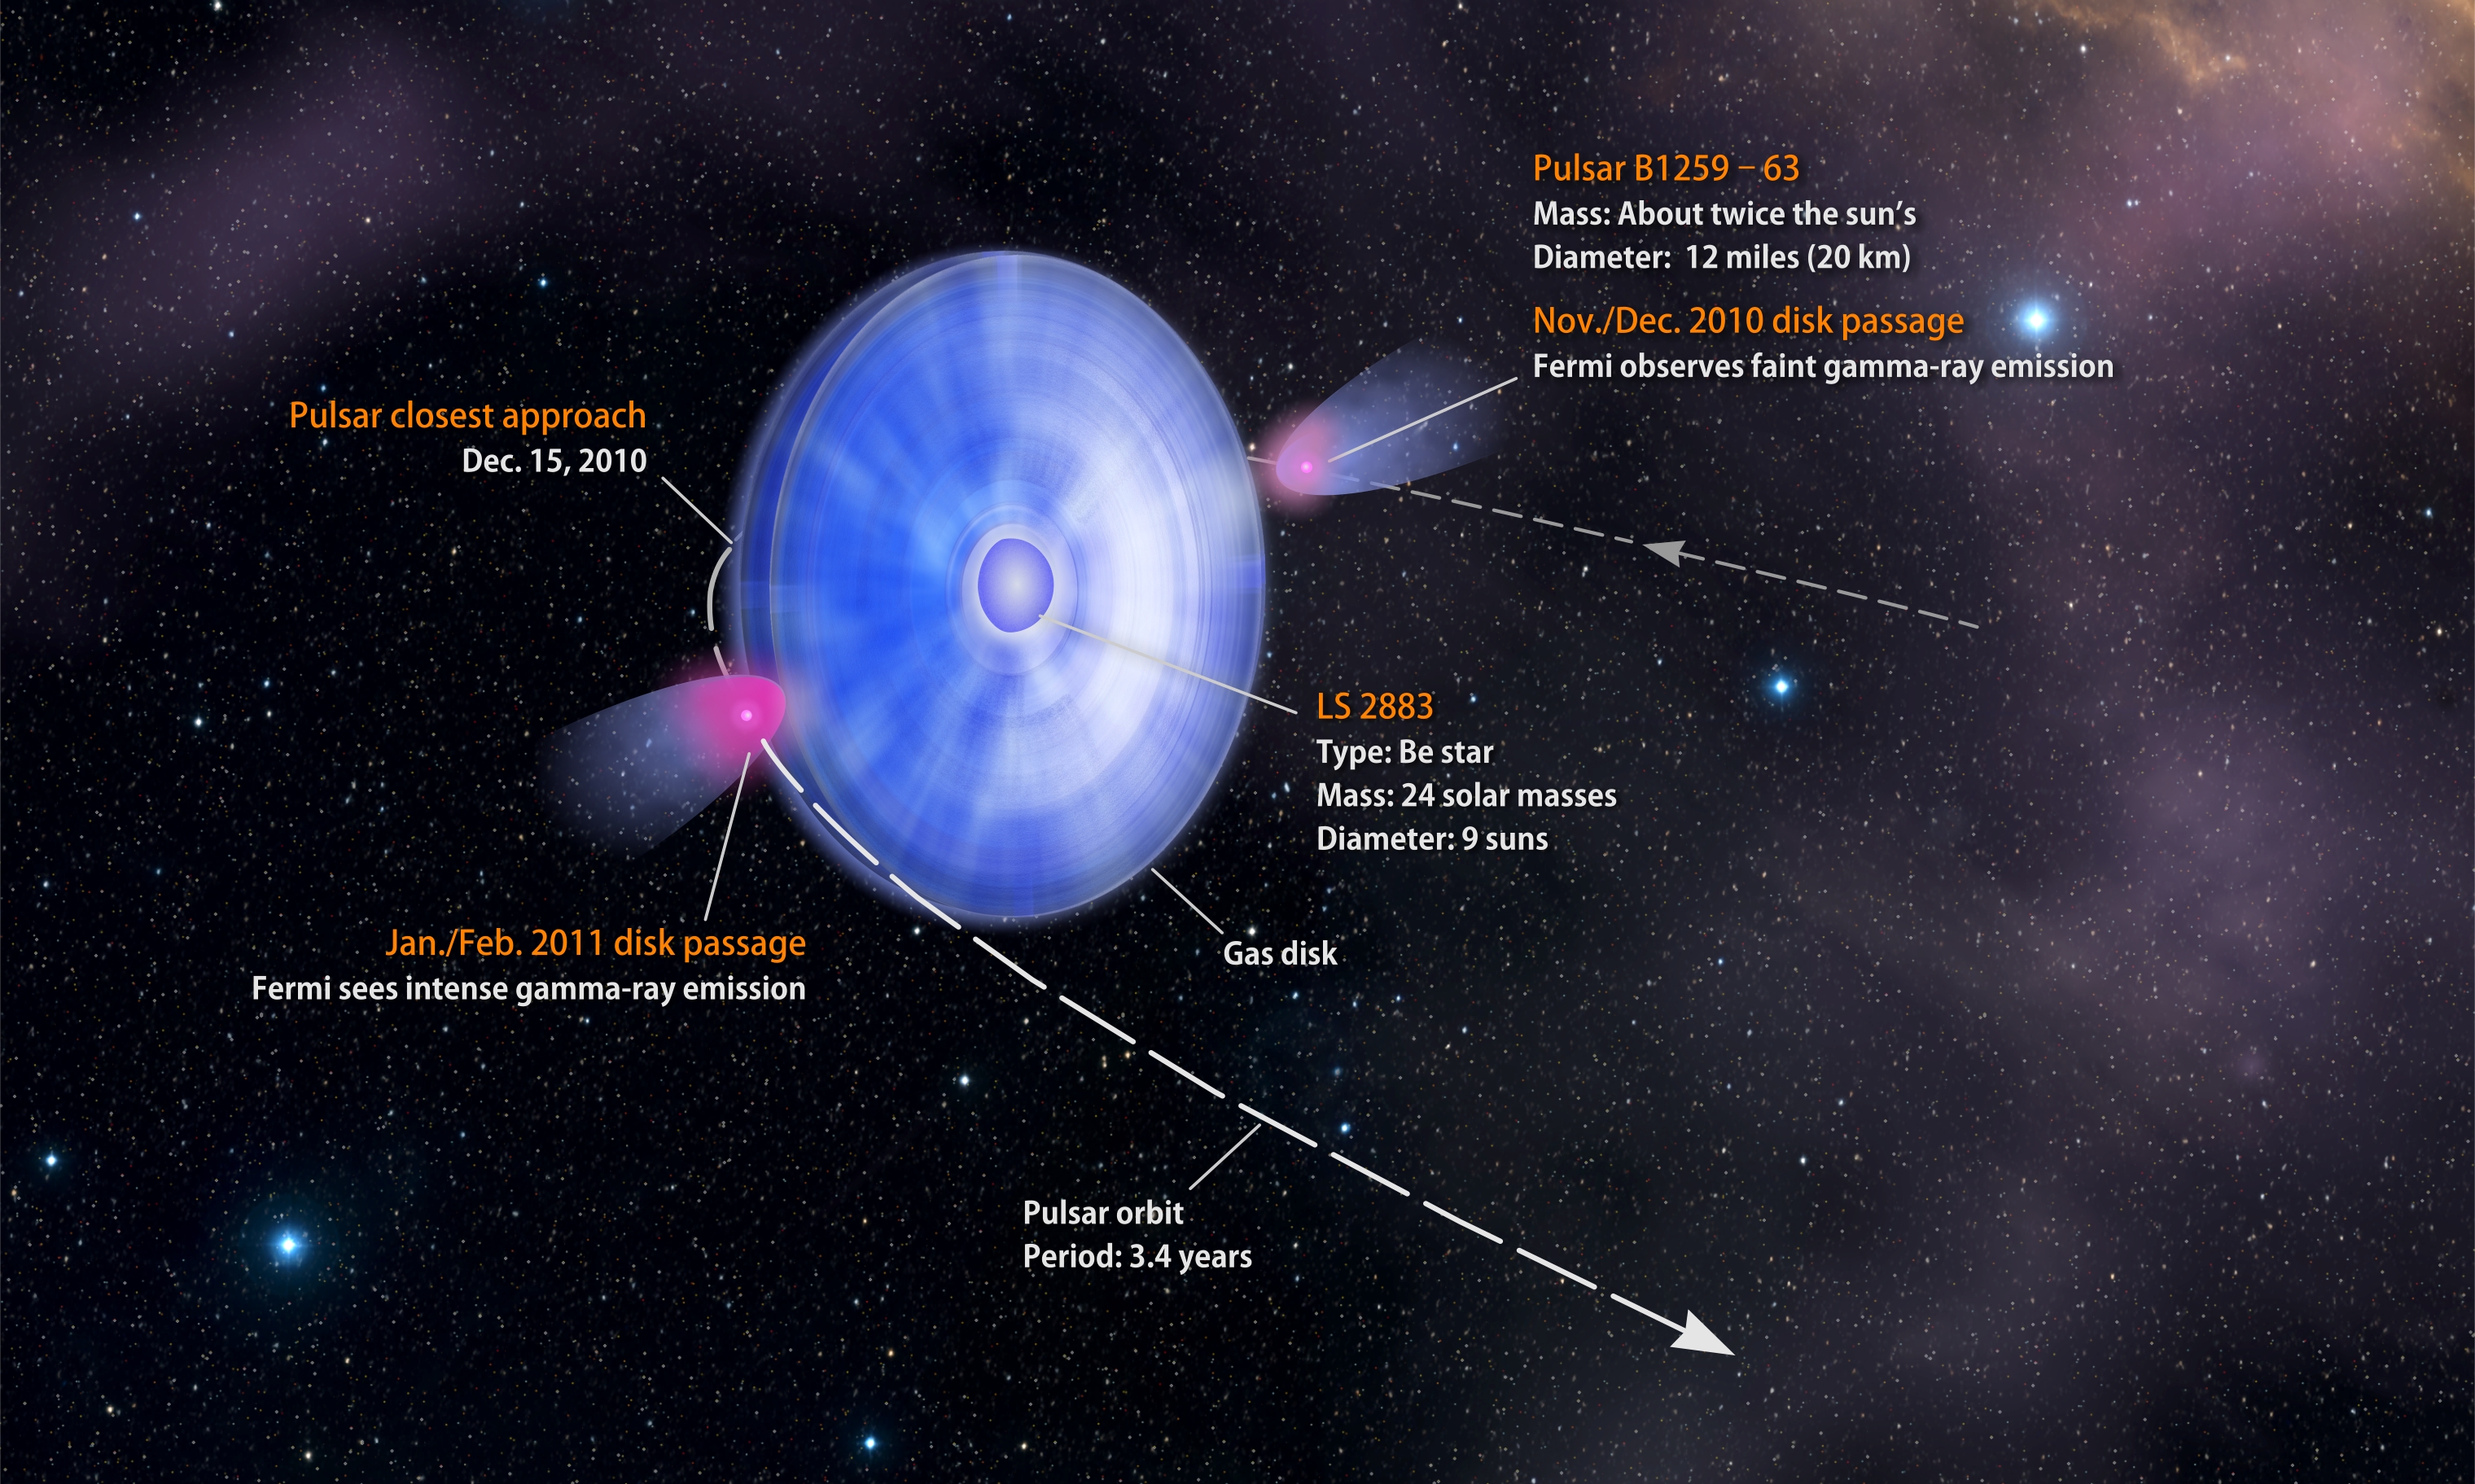 This diagram, which illustrates the view from Earth, shows the binary's anatomy as well as key events in the pulsar's recent close approach. Credit: NASA/Goddard Space Flight Center/Francis Reddy